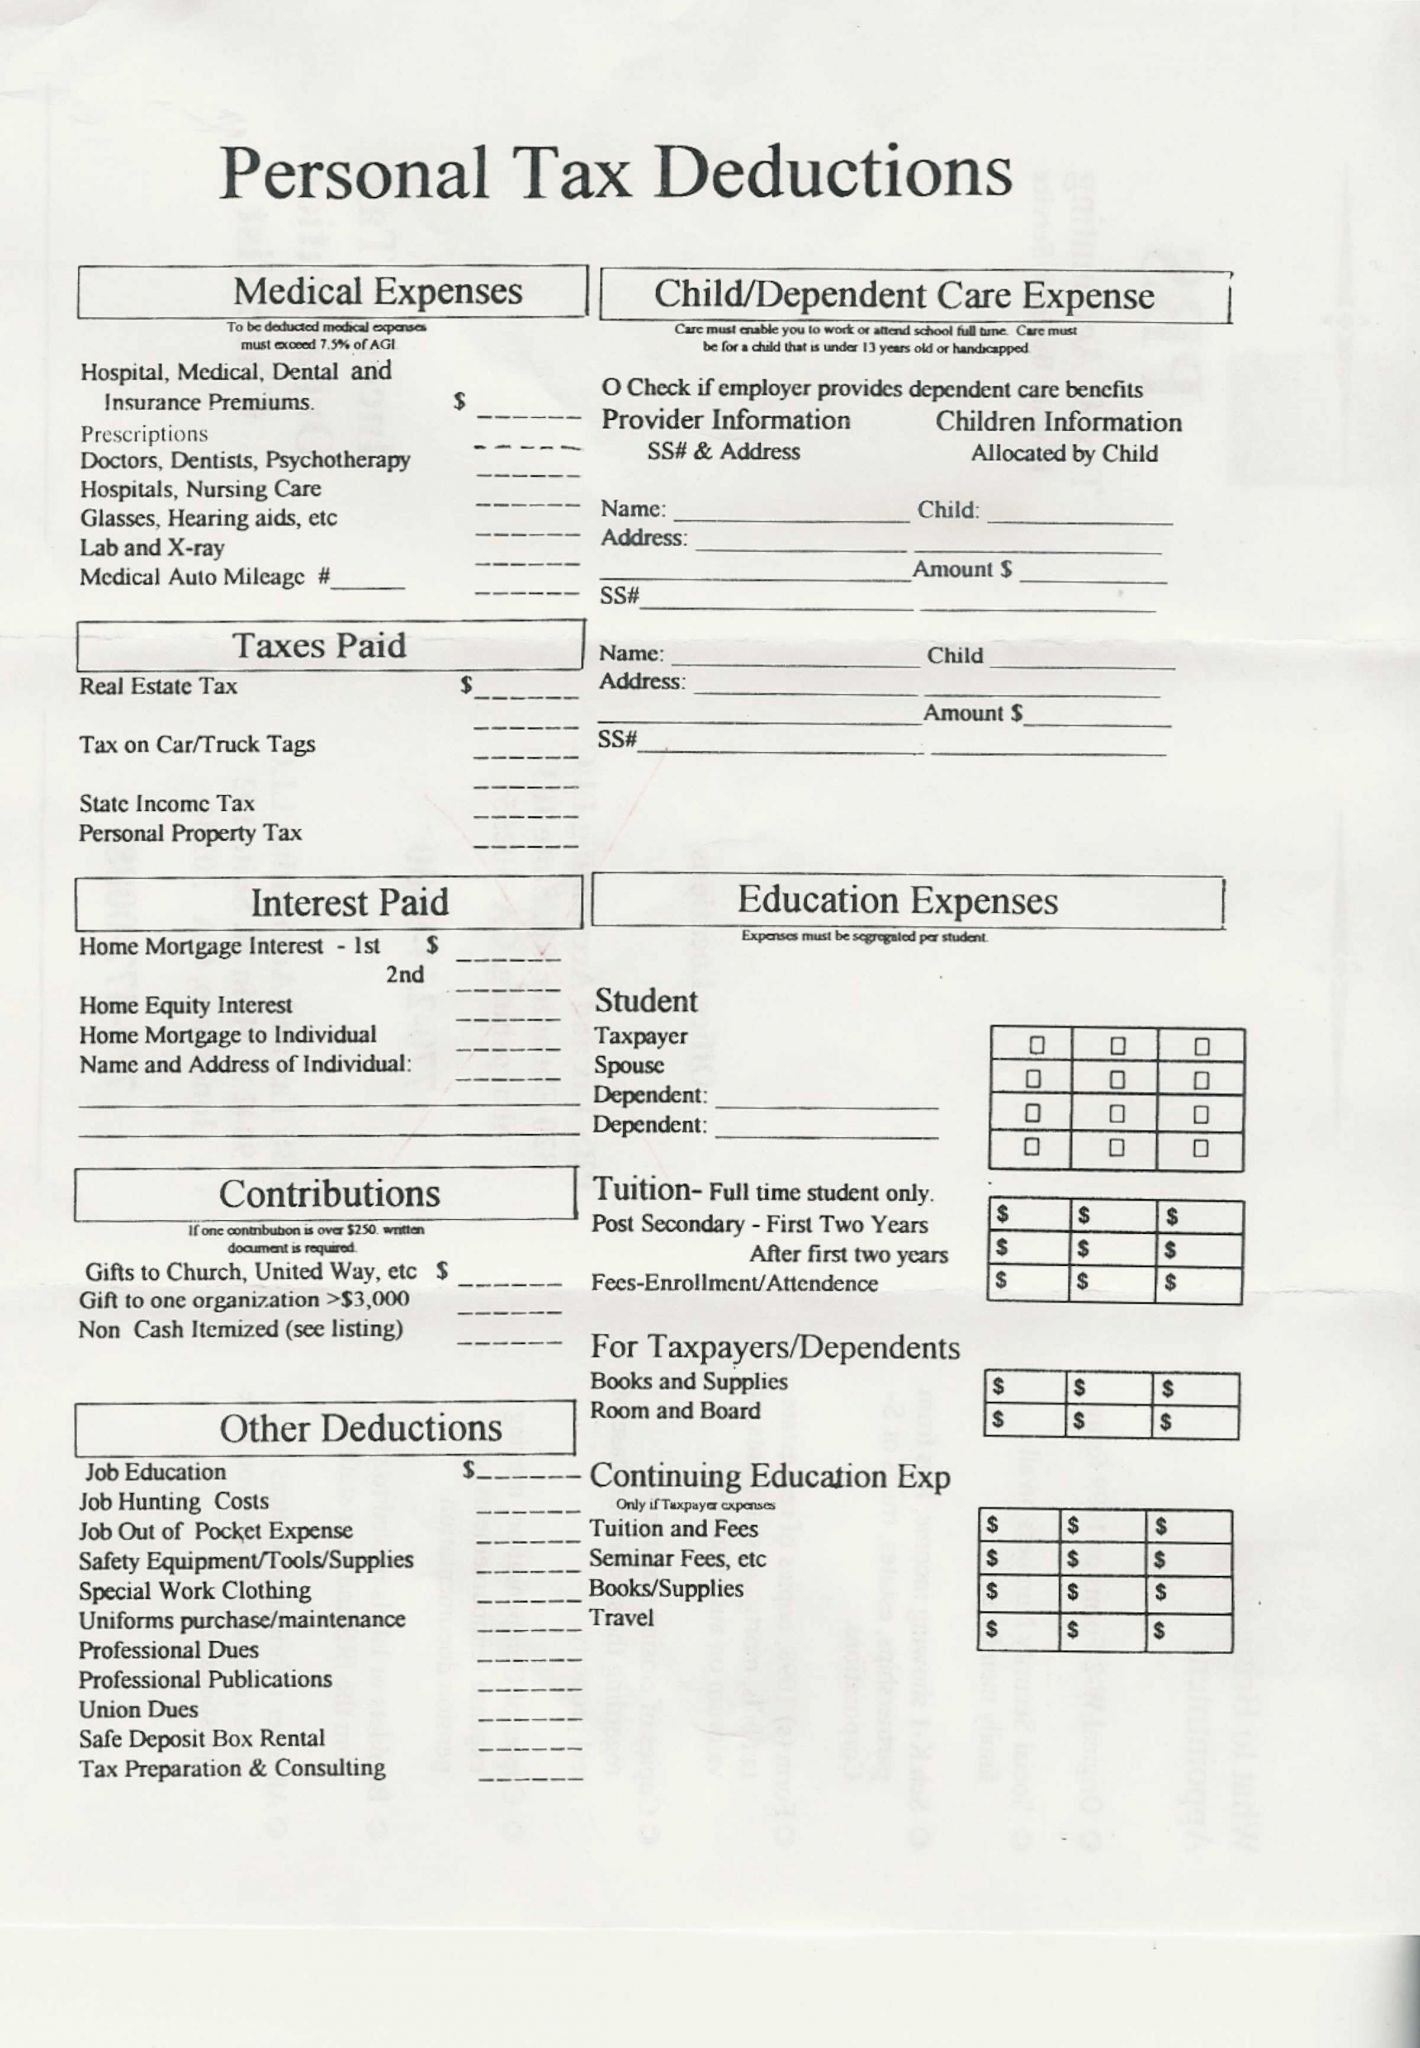 Police Officer Tax Deductions Worksheet  Briefencounters Also Police Officer Tax Deductions Worksheet